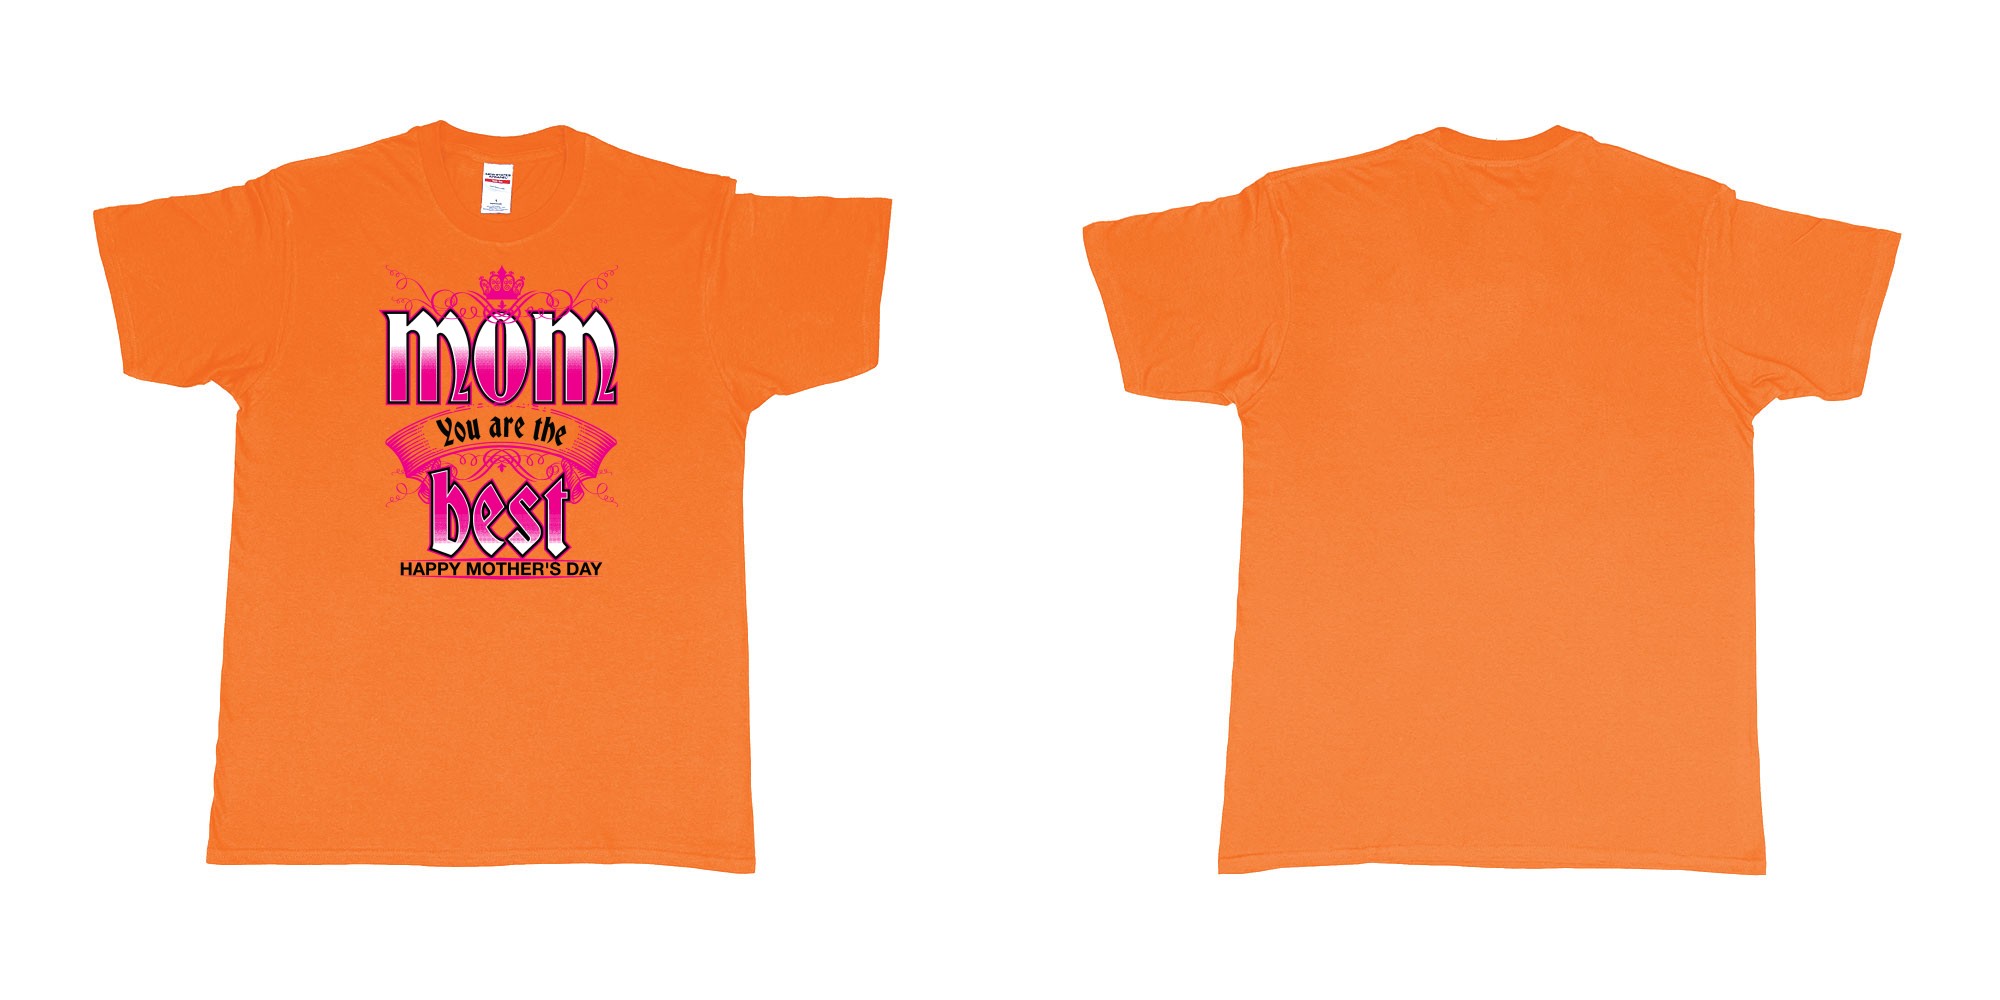 Custom tshirt design crown mom you are the best happy morthers day in fabric color orange choice your own text made in Bali by The Pirate Way